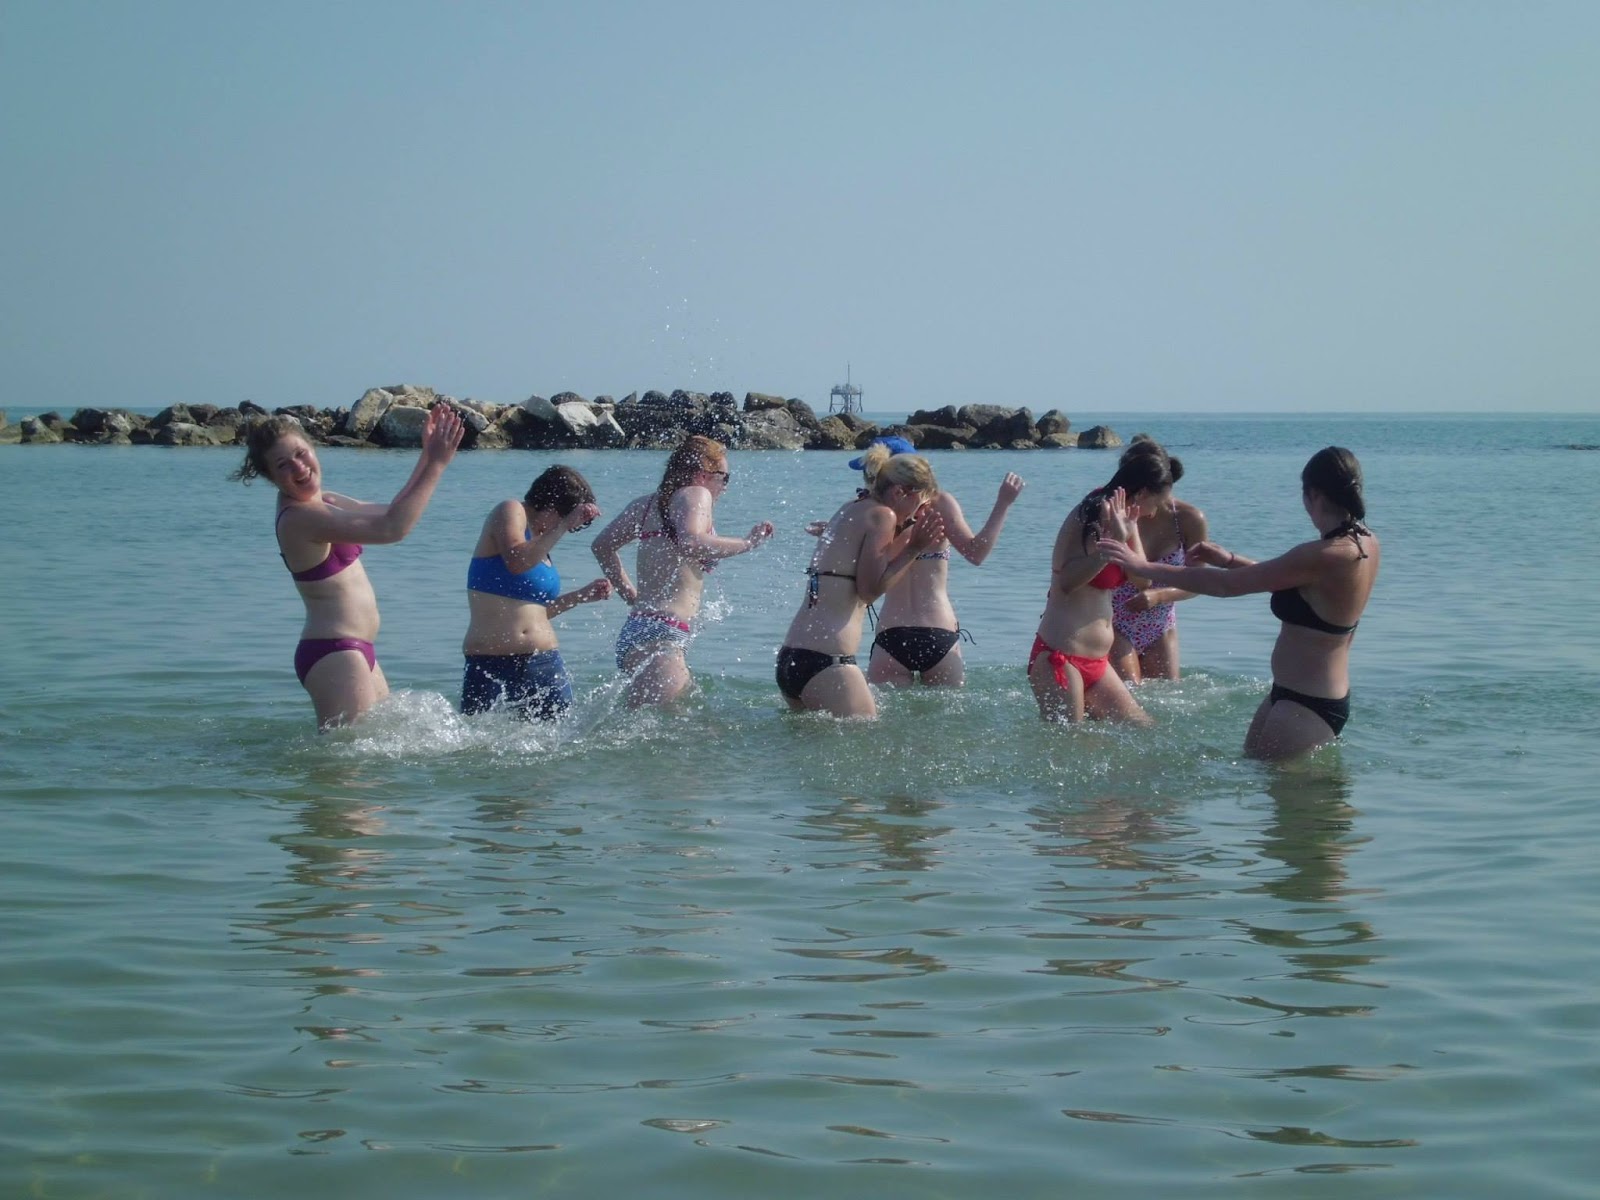 A group of women in bathing suits splash one another in the ocean.